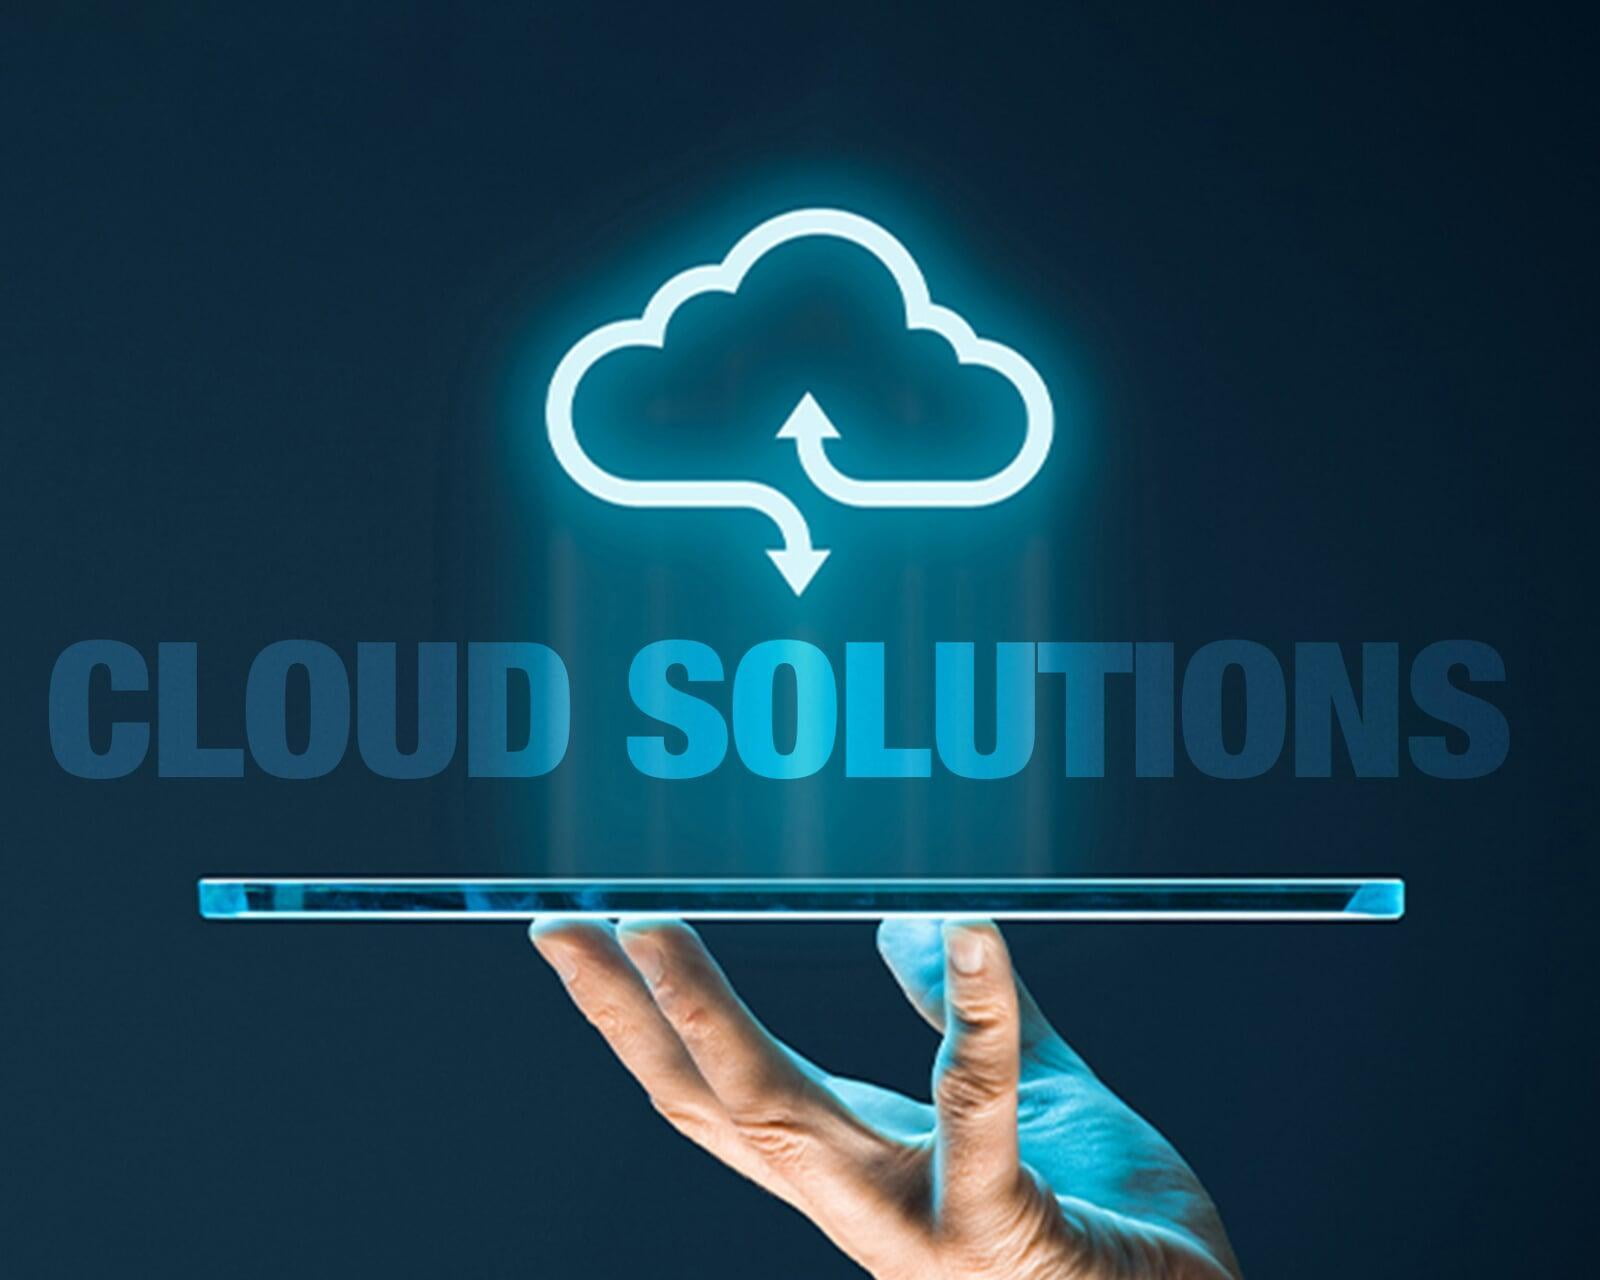 Struggling with the complexity of building a cloud solution?